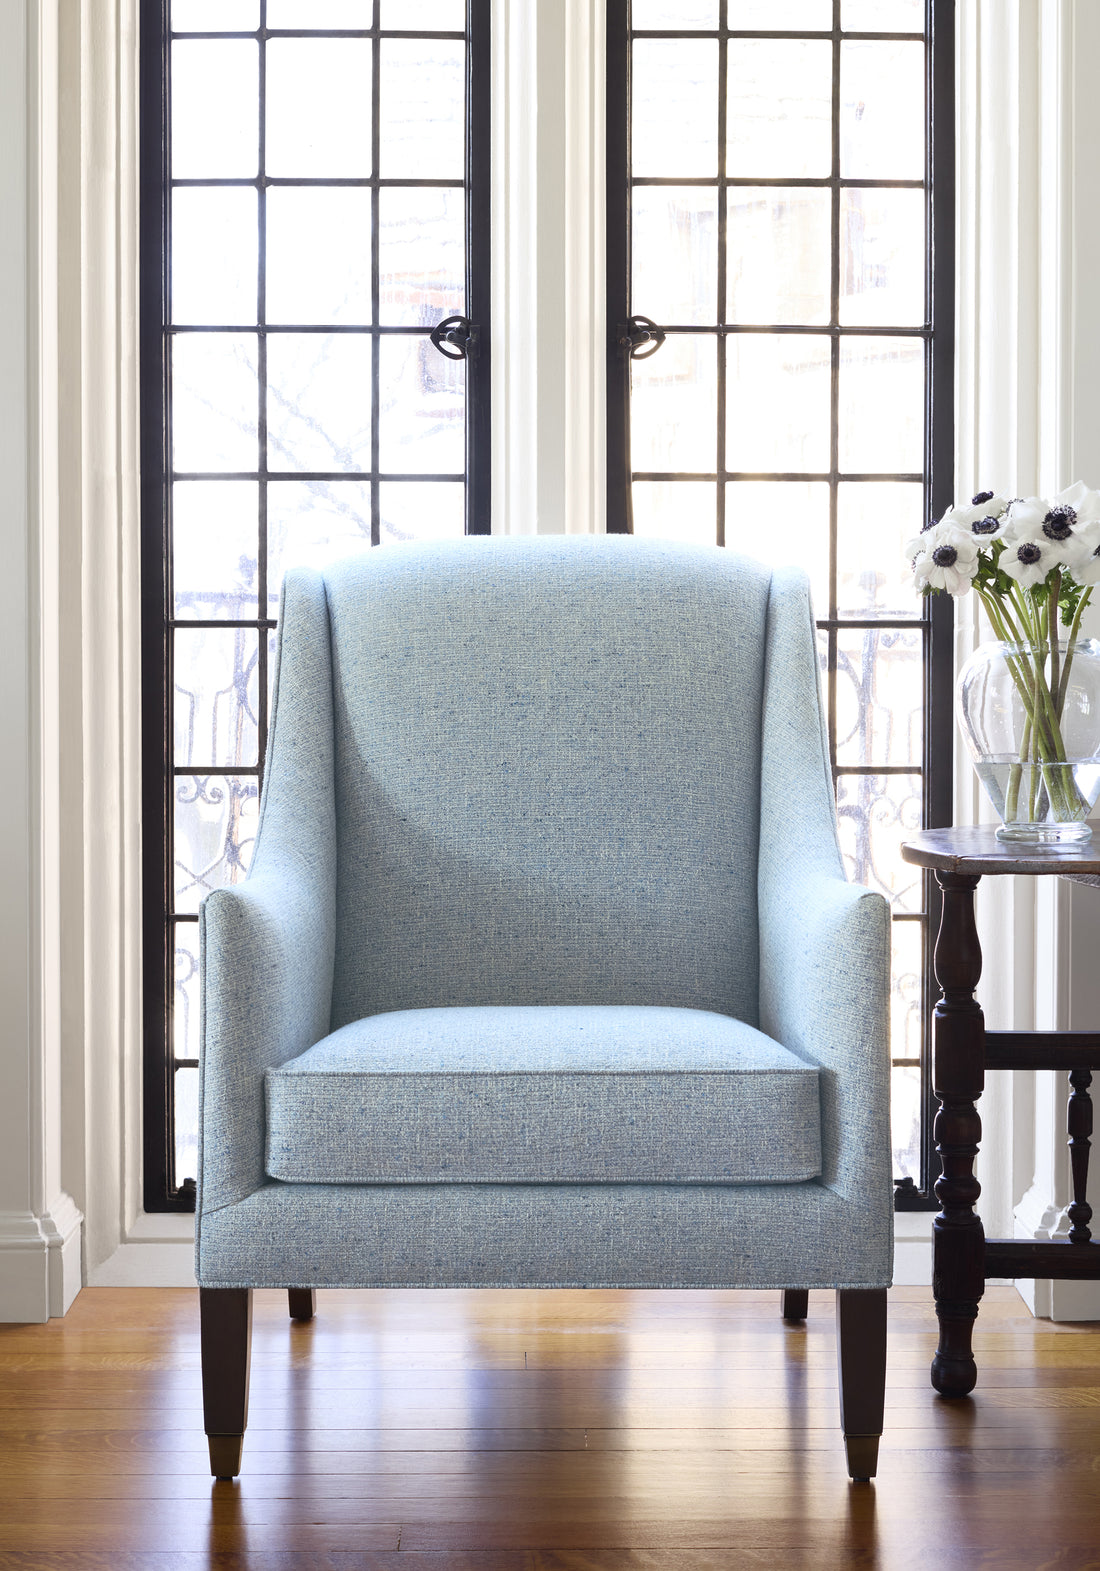 Living room with Shelton Wing Chair upholstered in Shannon woven fabric in Waterfall color - pattern number W80932 - by Thibaut fabrics